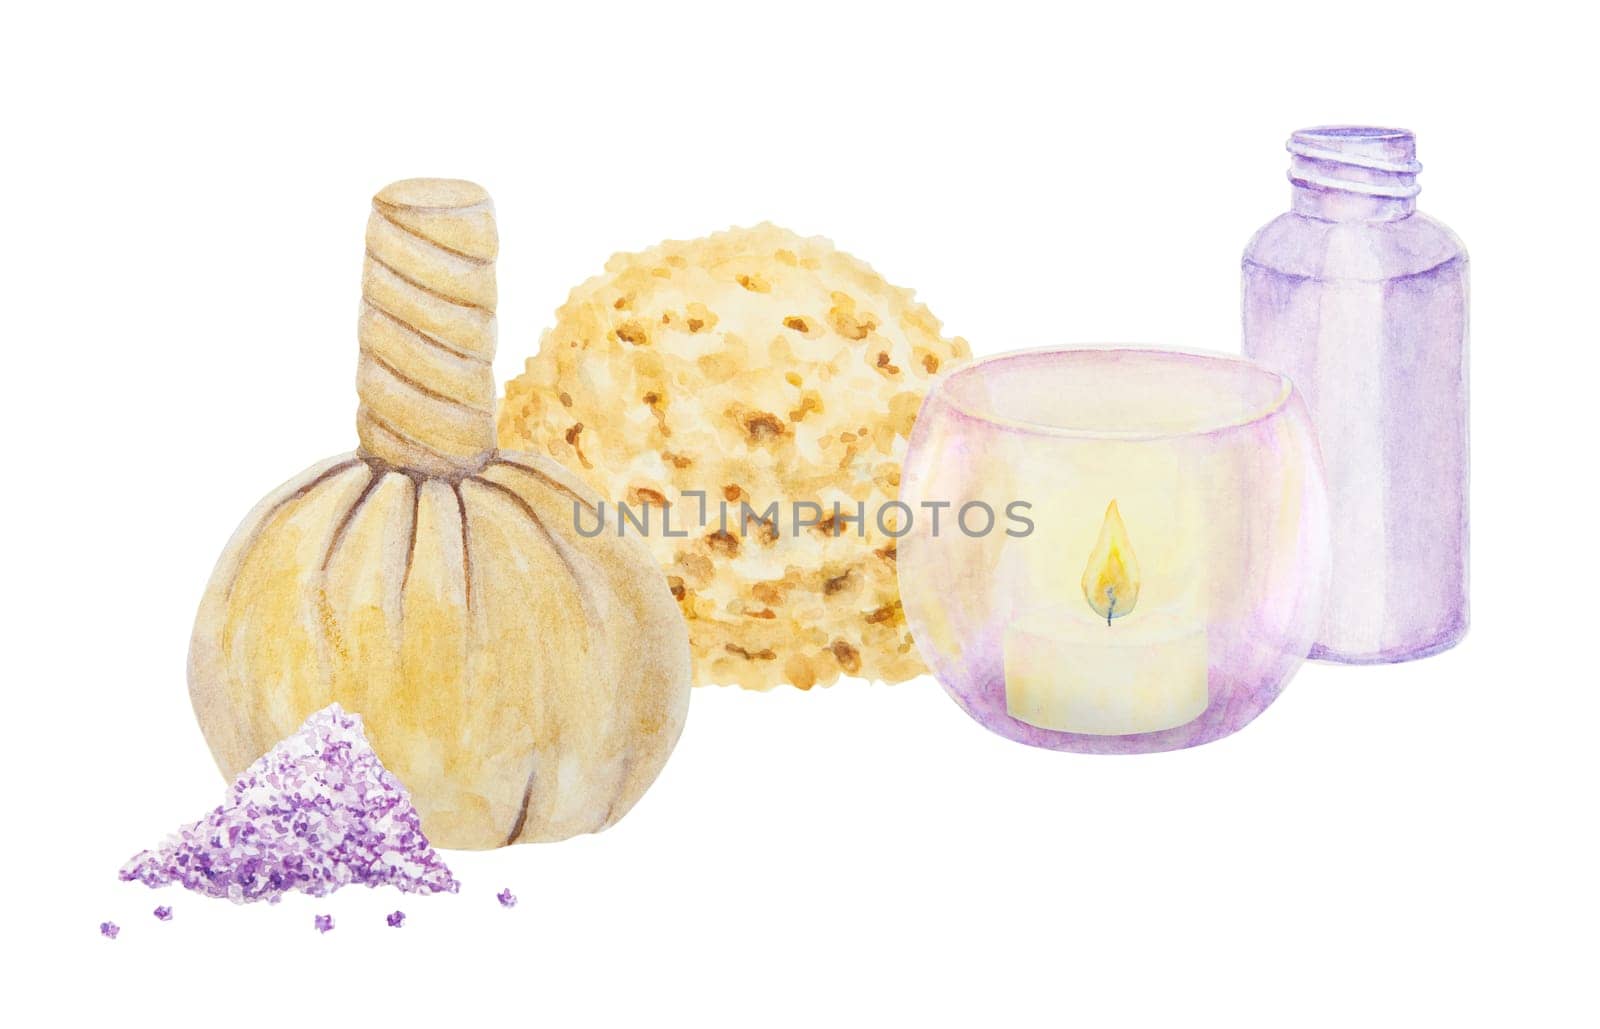 Spa and bathroom accessories. Watercolor hand drawn illustration for spa salon and wellness center: salt, natural sponge, massage bag, bottle, candle. Clipart for fashion, beauty, cosmetics prints by florainlove_art